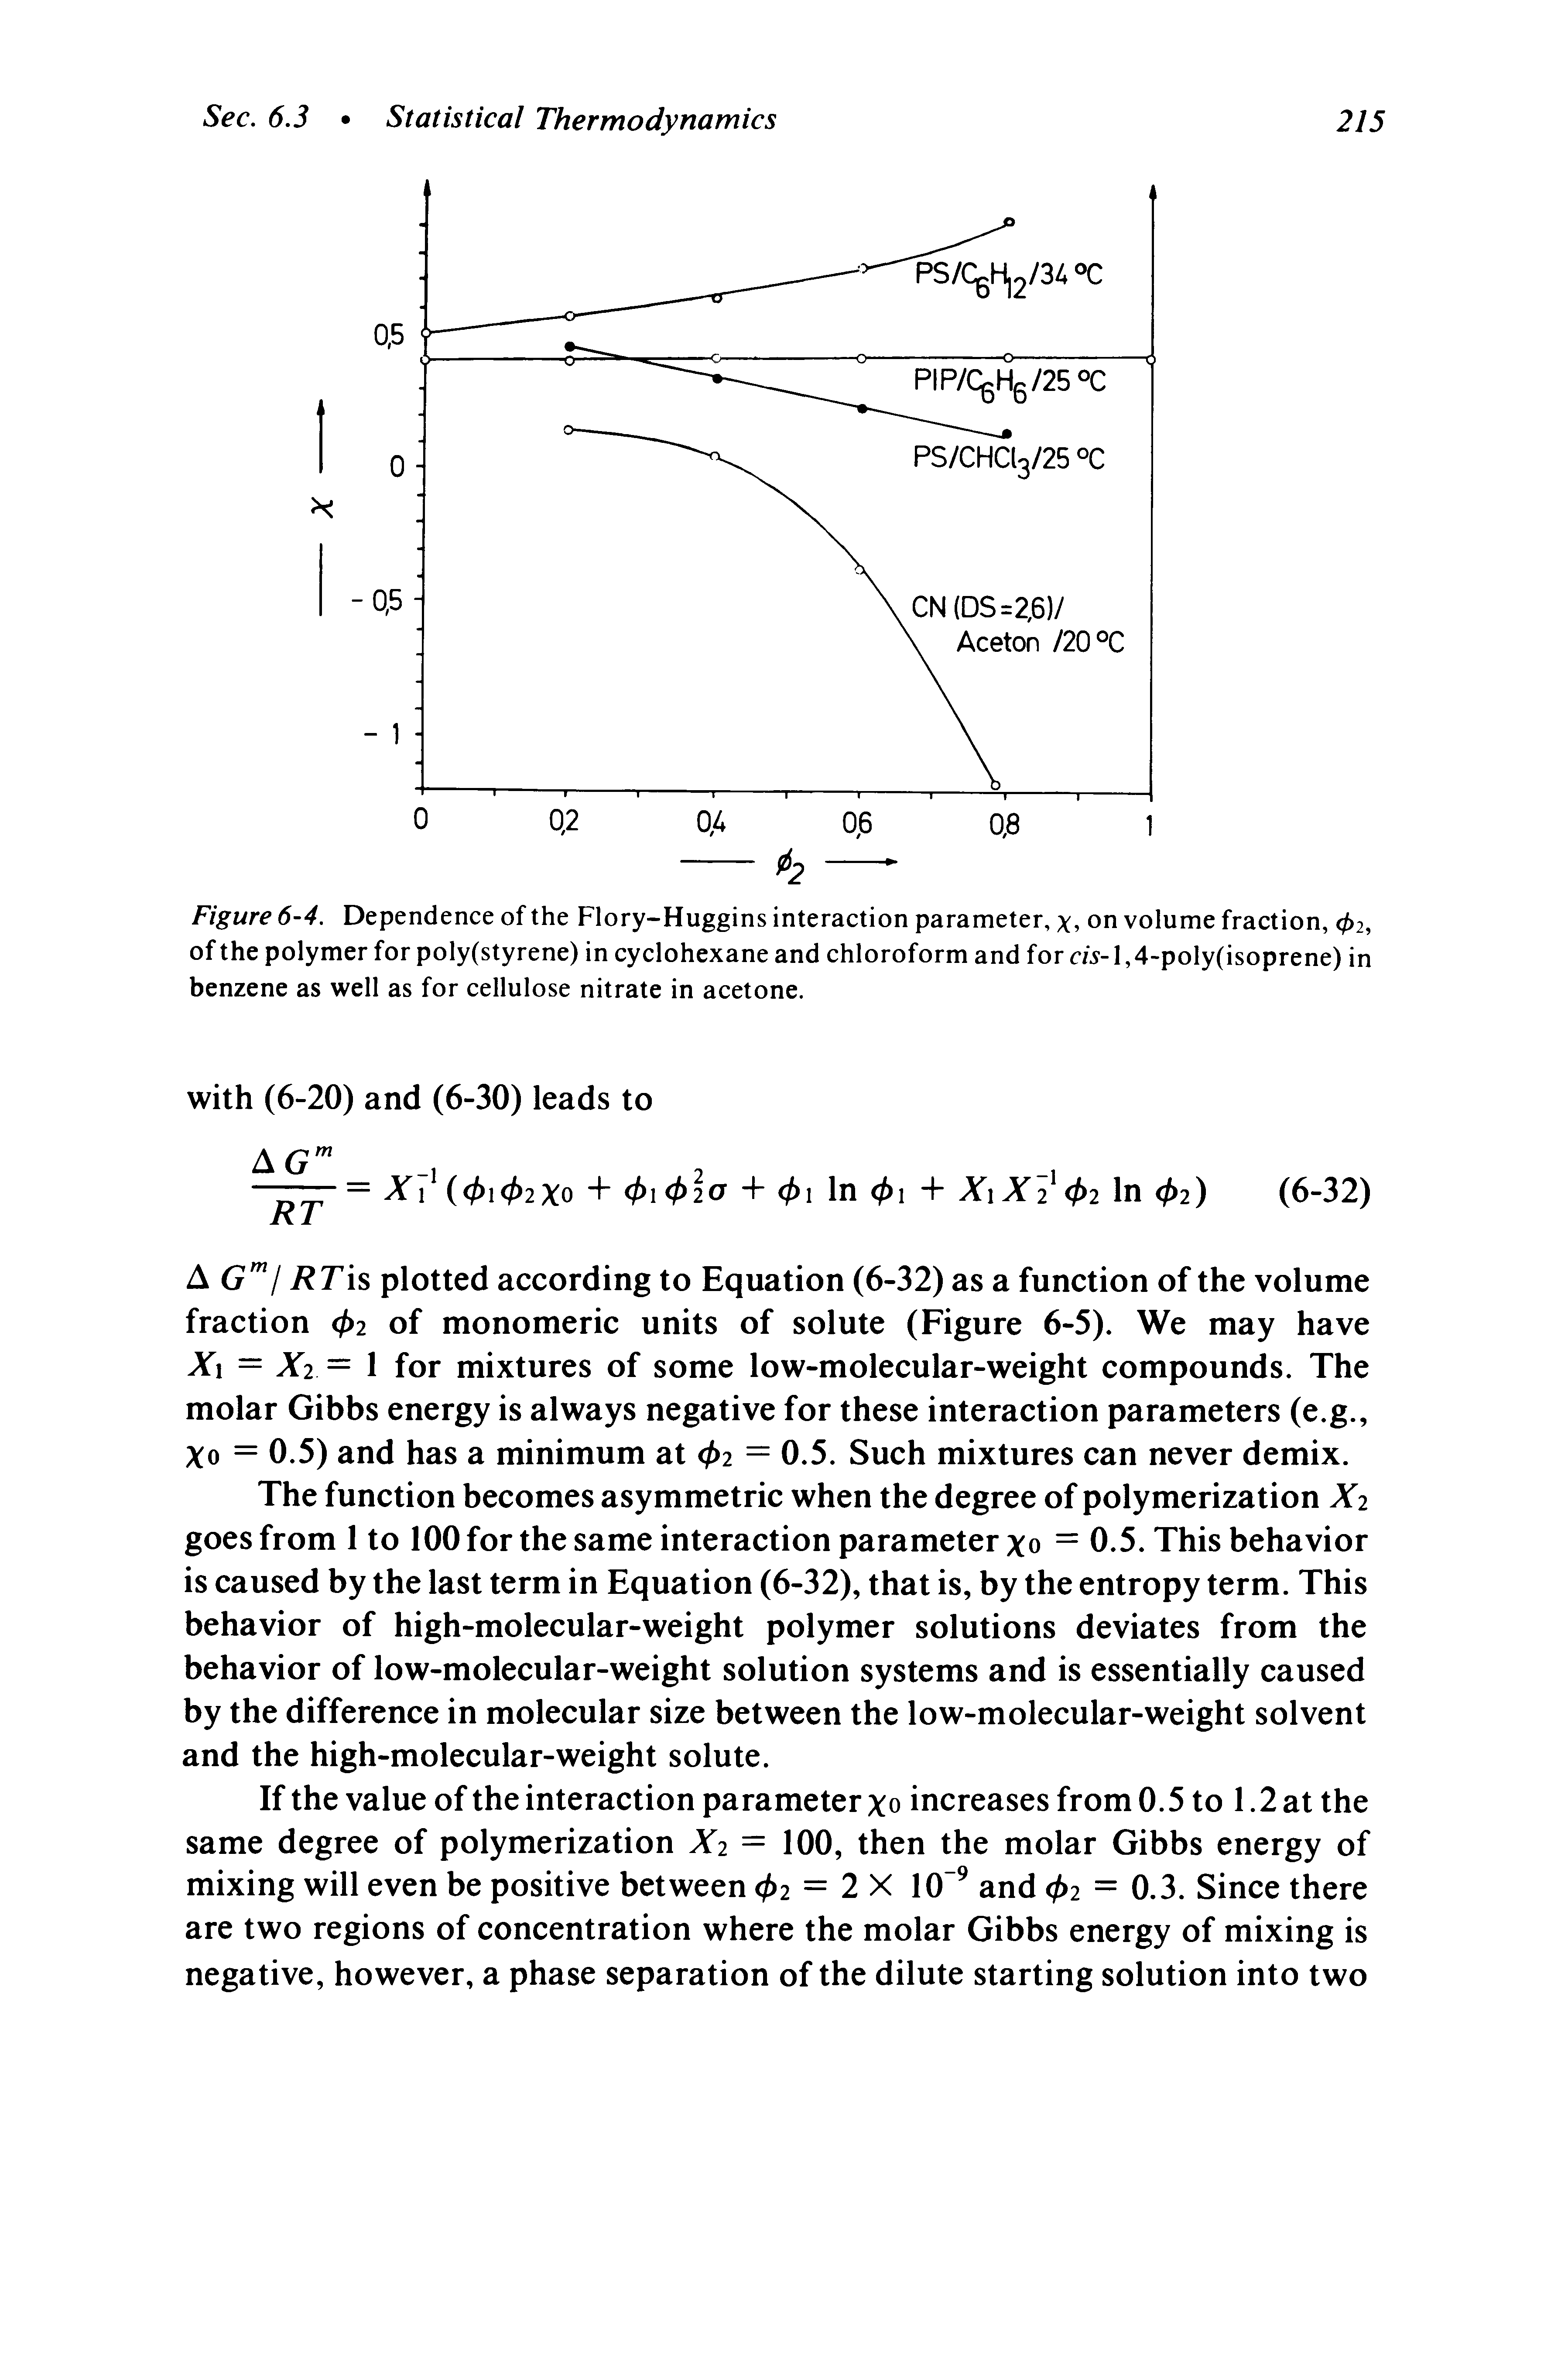 Figure 6-4. Dependence of the Flory-Huggins interaction parameter, x, on volume fraction, <f>2, of the polymer for poly(styrene) in cyclohexane and chloroform and for m-l,4-poly(isoprene) in benzene as well as for cellulose nitrate in acetone.